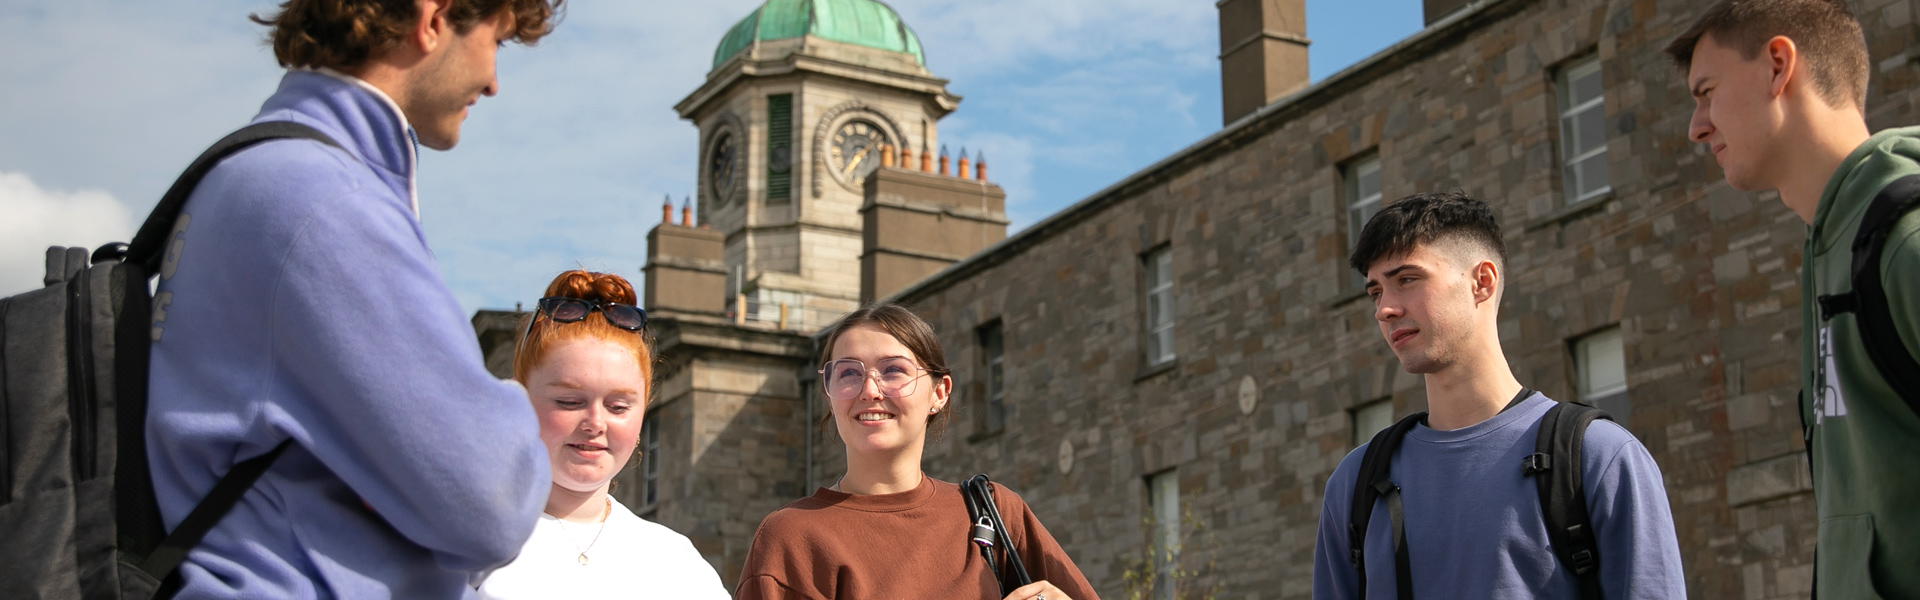 Students standing talking outside the clocktower on the Grangegorman campus